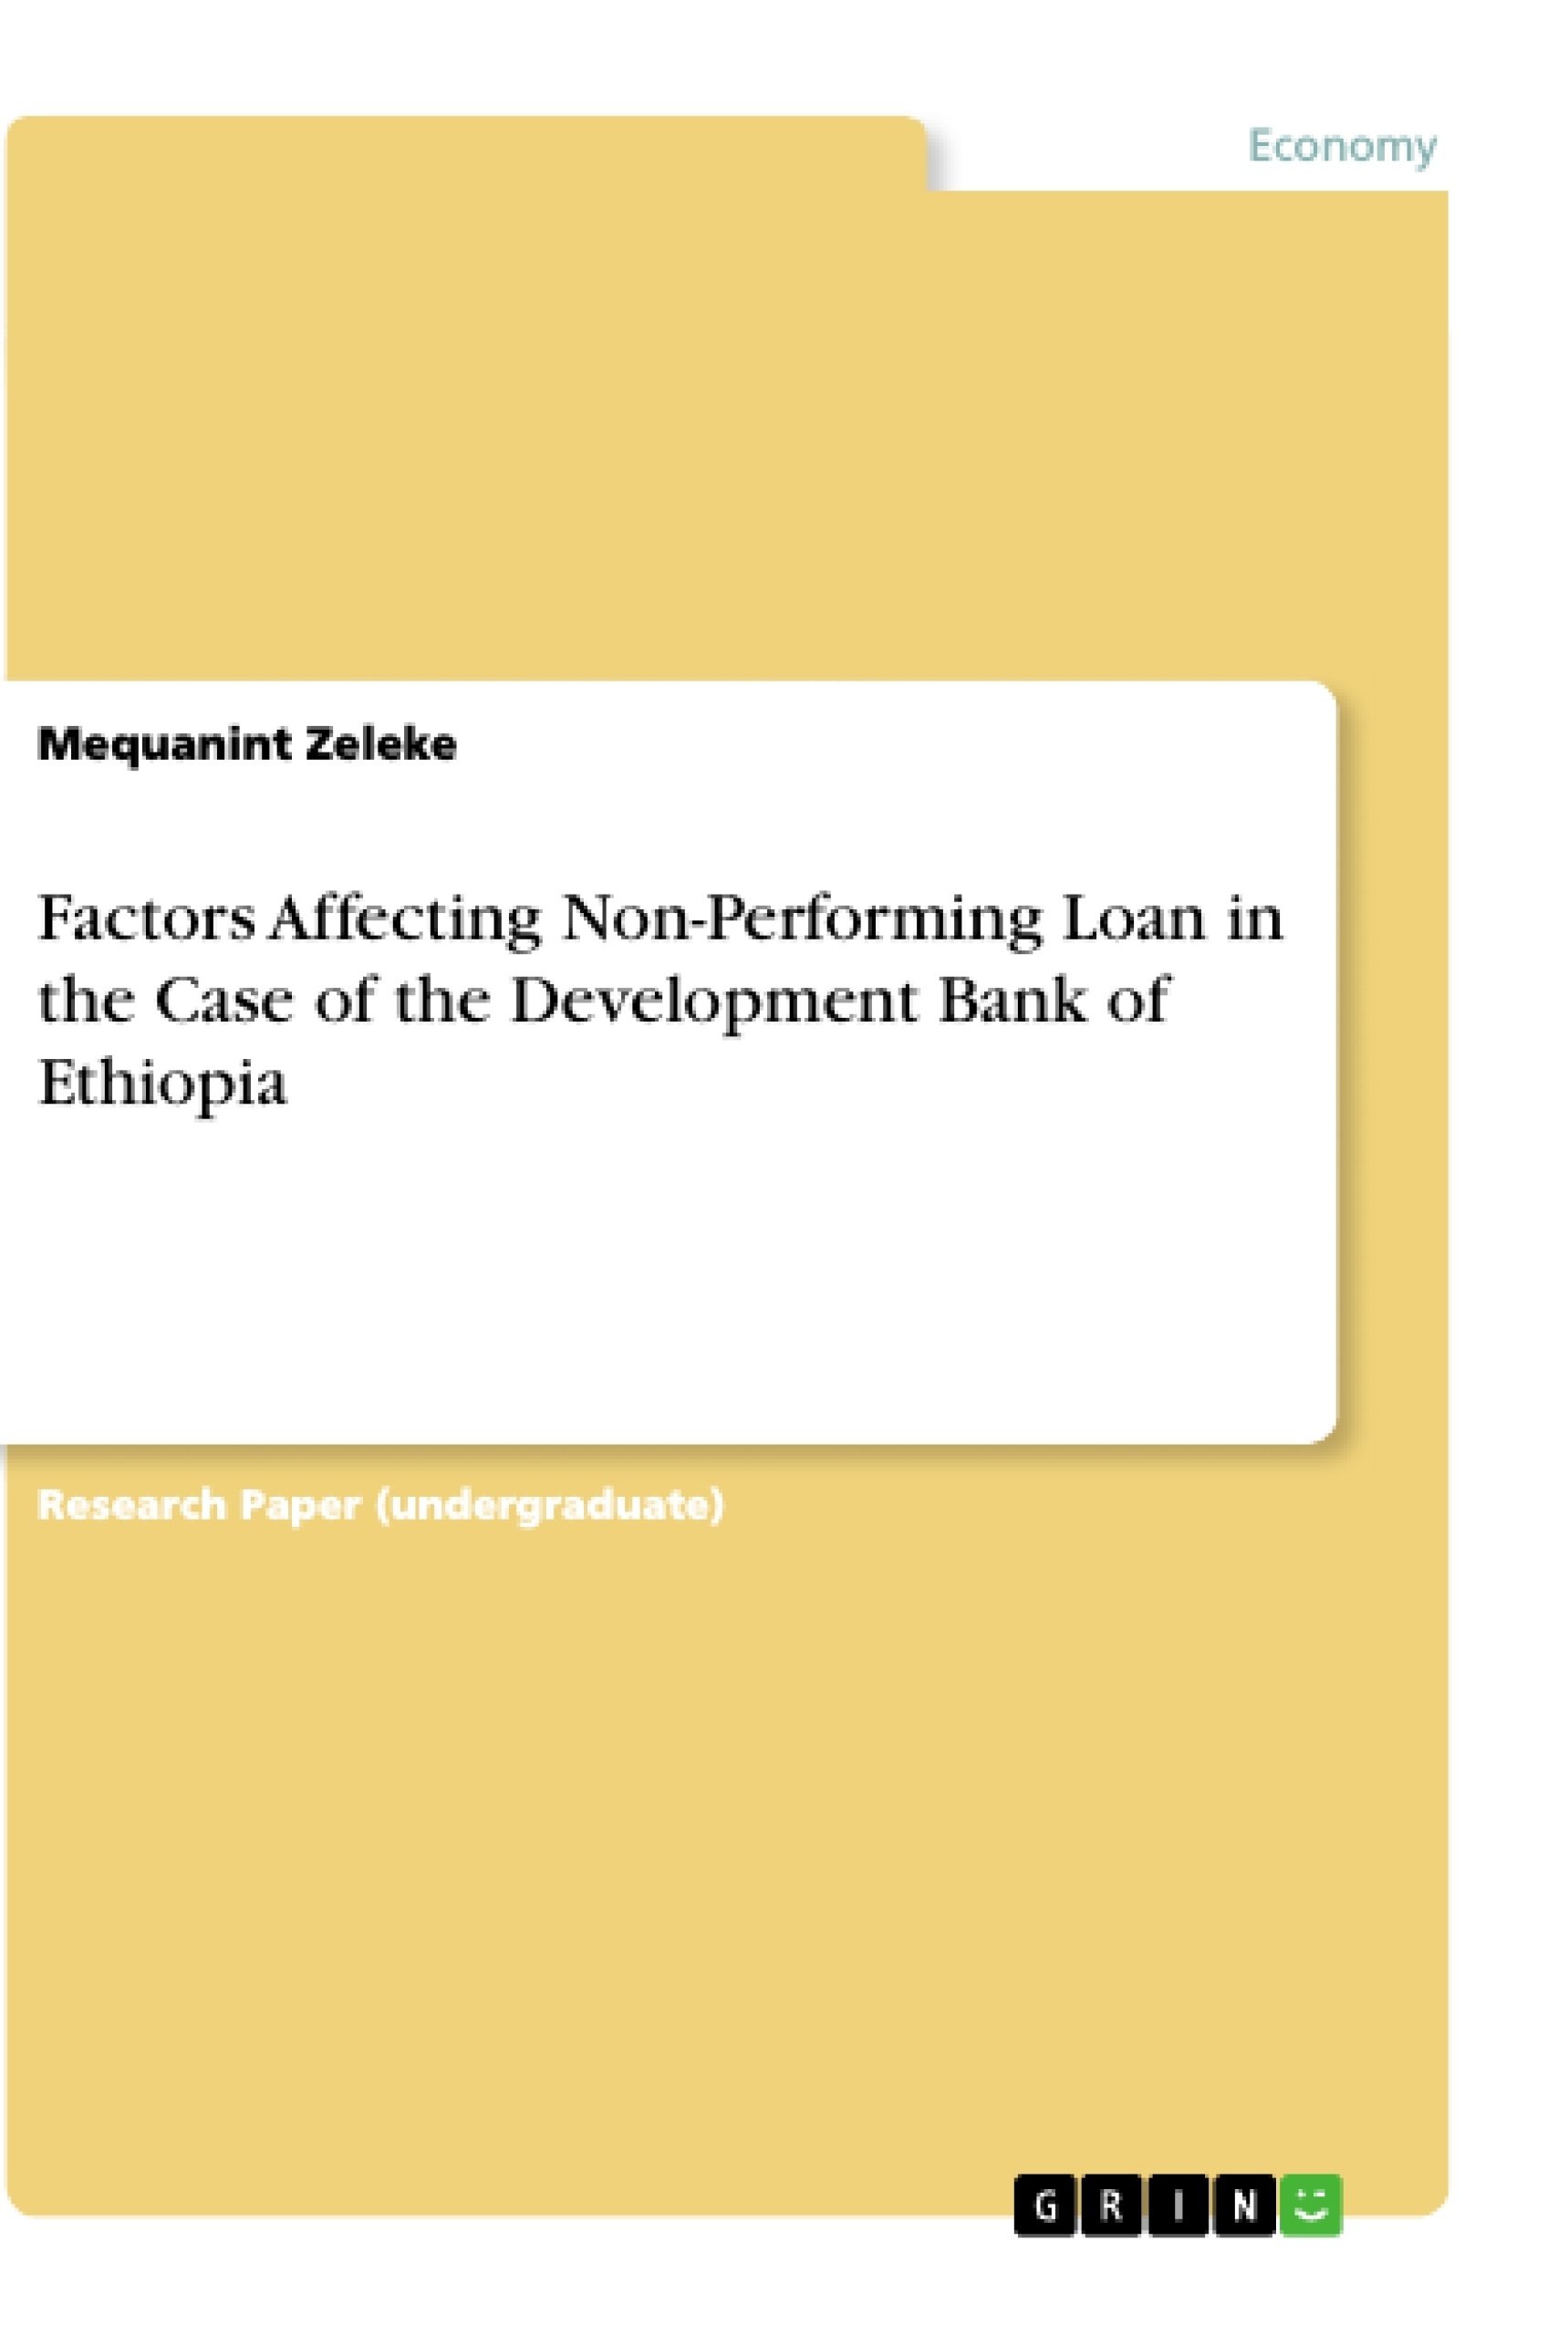 Titre: Factors Affecting Non-Performing Loan in the Case of the Development Bank of Ethiopia